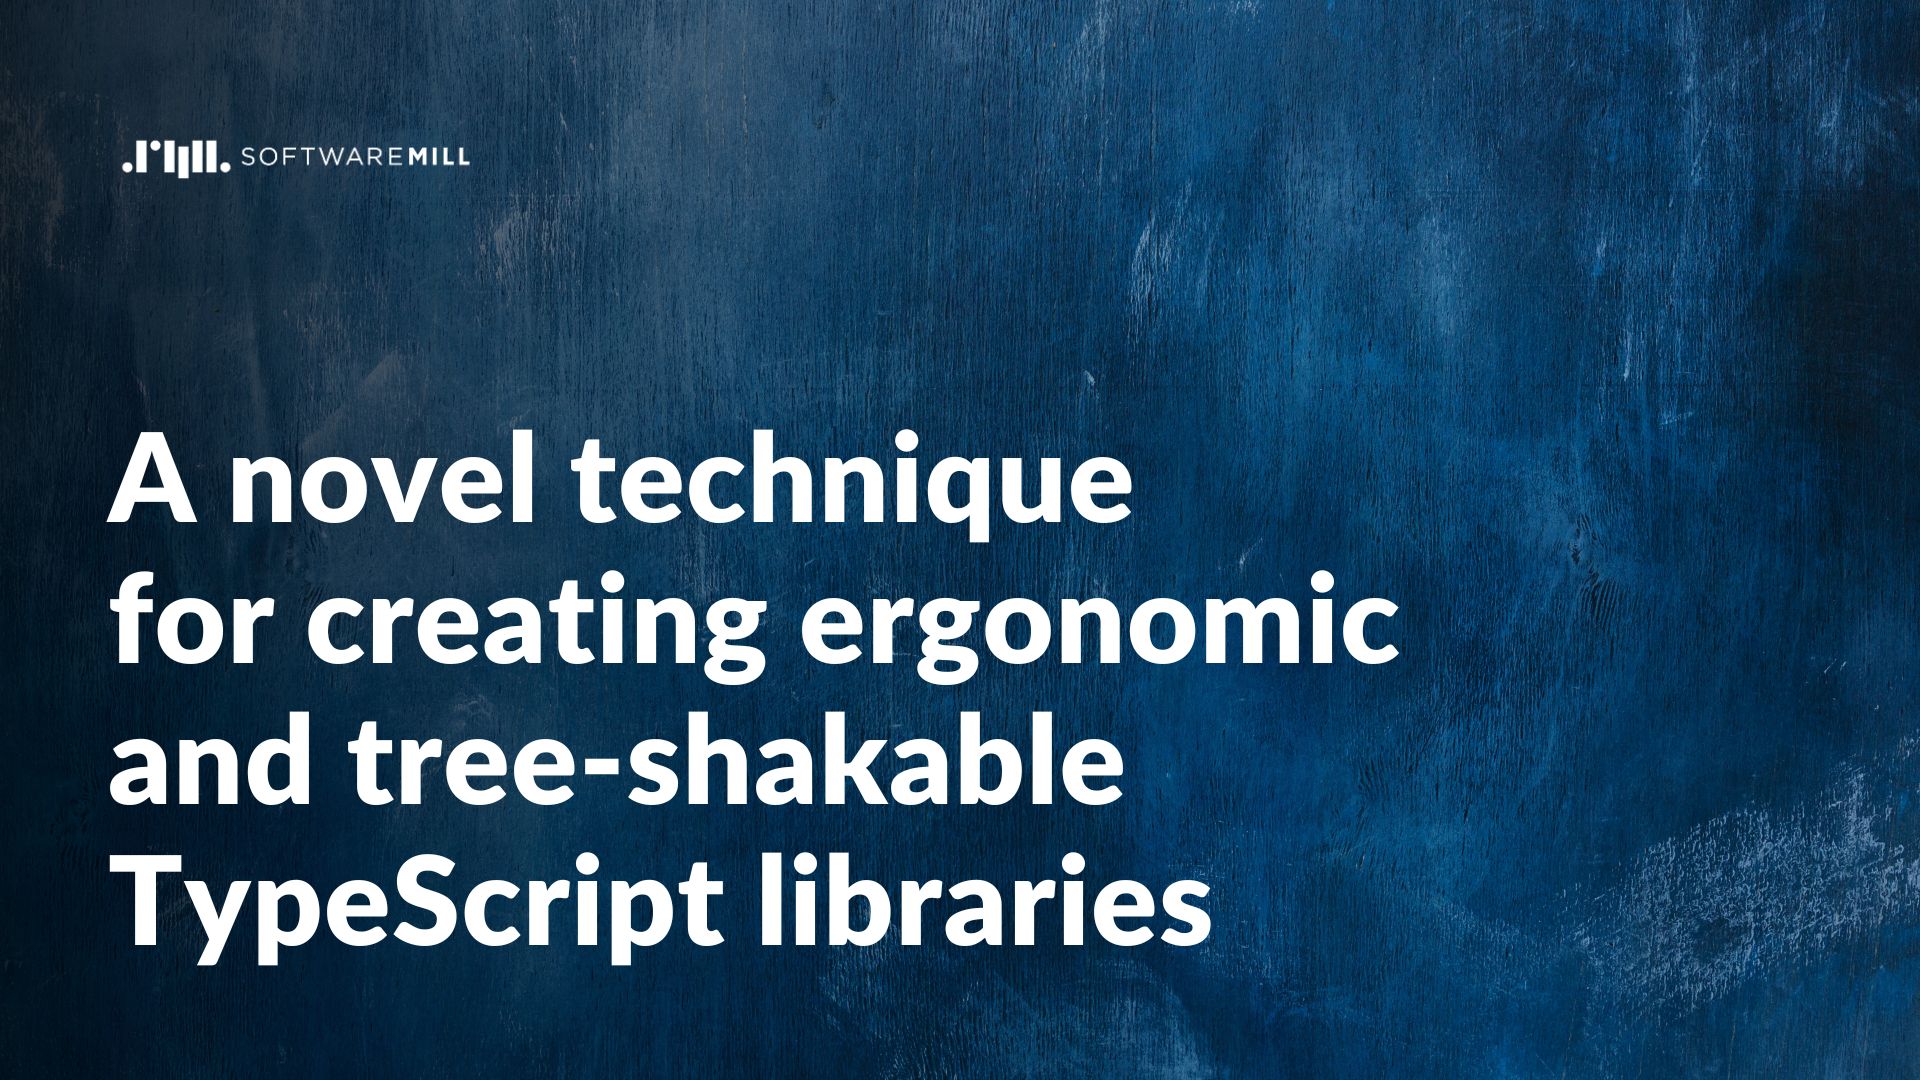 A novel technique for creating ergonomic and tree-shakable TypeScript libraries webp image